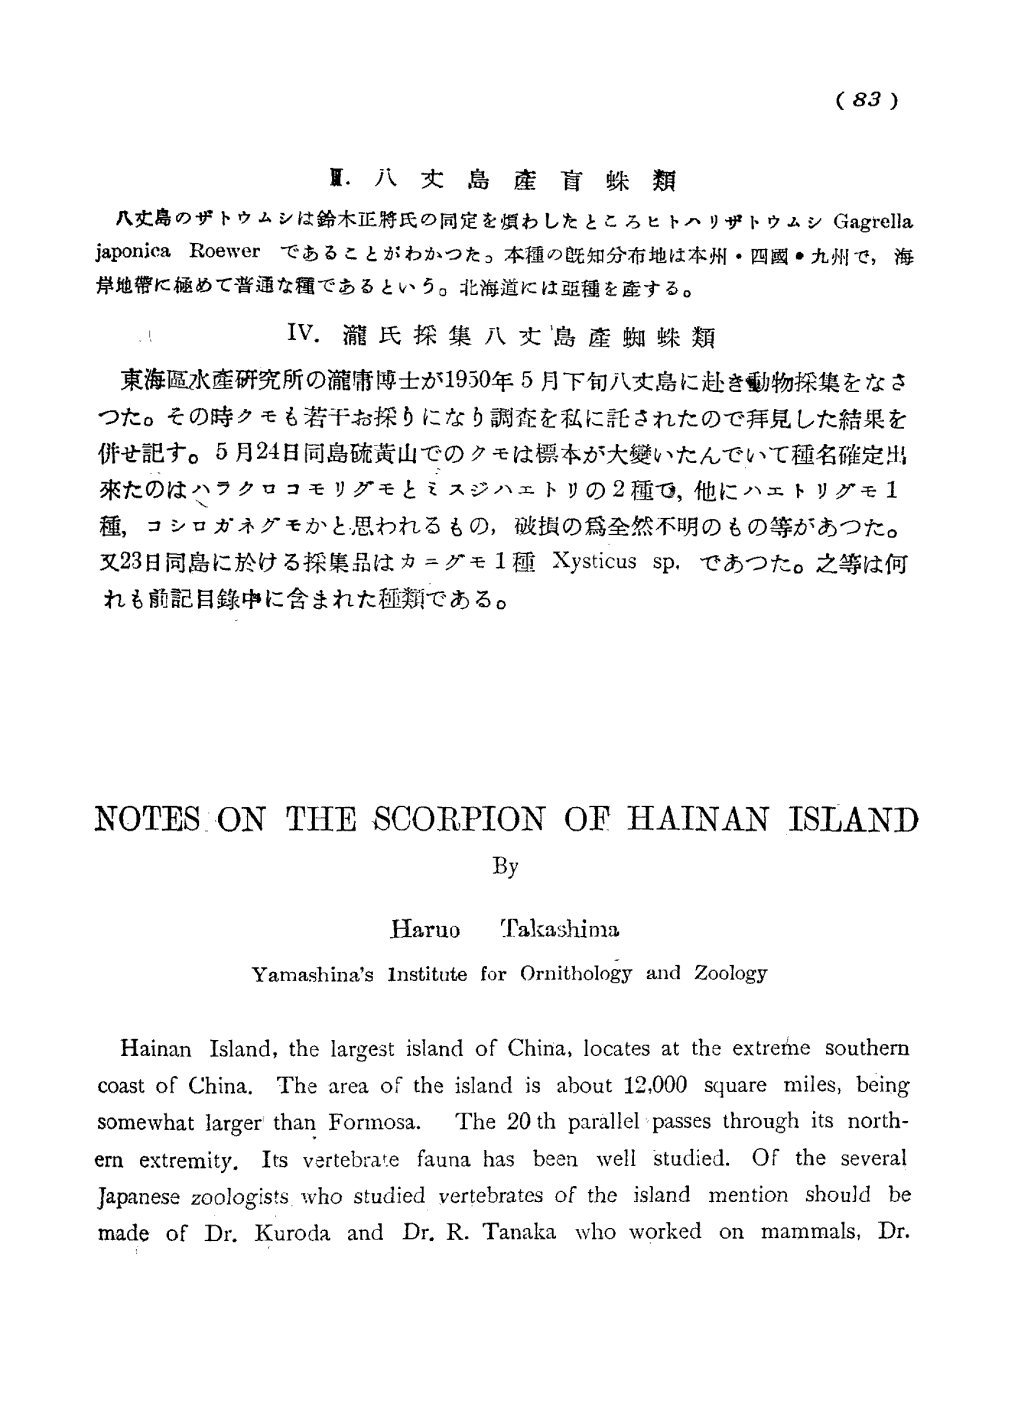 Notes on the Scorpion of Hainan Island